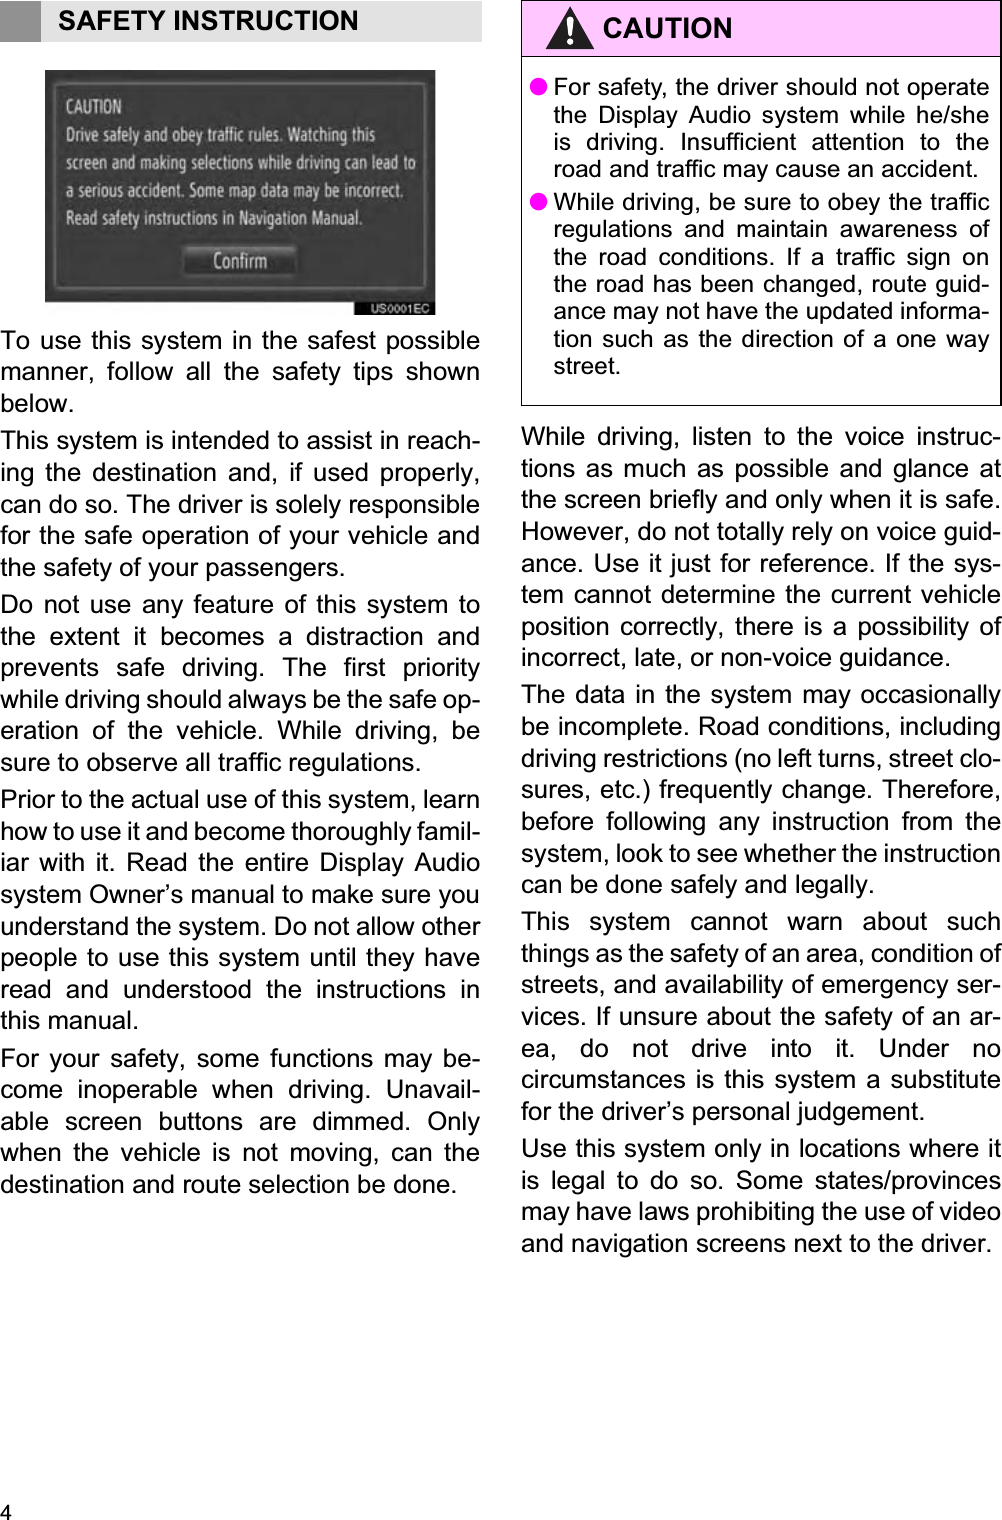 41. BASIC INFORMATION BEFORE OPERATIONTo use this system in the safest possiblemanner, follow all the safety tips shownbelow.This system is intended to assist in reach-ing the destination and, if used properly,can do so. The driver is solely responsiblefor the safe operation of your vehicle andthe safety of your passengers.Do not use any feature of this system tothe extent it becomes a distraction andprevents safe driving. The first prioritywhile driving should always be the safe op-eration of the vehicle. While driving, besure to observe all traffic regulations. Prior to the actual use of this system, learnhow to use it and become thoroughly famil-iar with it. Read the entire Display Audiosystem Owner’s manual to make sure youunderstand the system. Do not allow otherpeople to use this system until they haveread and understood the instructions inthis manual.For your safety, some functions may be-come inoperable when driving. Unavail-able screen buttons are dimmed. Onlywhen the vehicle is not moving, can thedestination and route selection be done.While driving, listen to the voice instruc-tions as much as possible and glance atthe screen briefly and only when it is safe.However, do not totally rely on voice guid-ance. Use it just for reference. If the sys-tem cannot determine the current vehicleposition correctly, there is a possibility ofincorrect, late, or non-voice guidance.The data in the system may occasionallybe incomplete. Road conditions, includingdriving restrictions (no left turns, street clo-sures, etc.) frequently change. Therefore,before following any instruction from thesystem, look to see whether the instructioncan be done safely and legally.This system cannot warn about suchthings as the safety of an area, condition ofstreets, and availability of emergency ser-vices. If unsure about the safety of an ar-ea, do not drive into it. Under nocircumstances is this system a substitutefor the driver’s personal judgement.Use this system only in locations where itis legal to do so. Some states/provincesmay have laws prohibiting the use of videoand navigation screens next to the driver.SAFETY INSTRUCTION CAUTION●For safety, the driver should not operatethe Display Audio system while he/sheis driving. Insufficient attention to theroad and traffic may cause an accident.●While driving, be sure to obey the trafficregulations and maintain awareness ofthe road conditions. If a traffic sign onthe road has been changed, route guid-ance may not have the updated informa-tion such as the direction of a one waystreet.